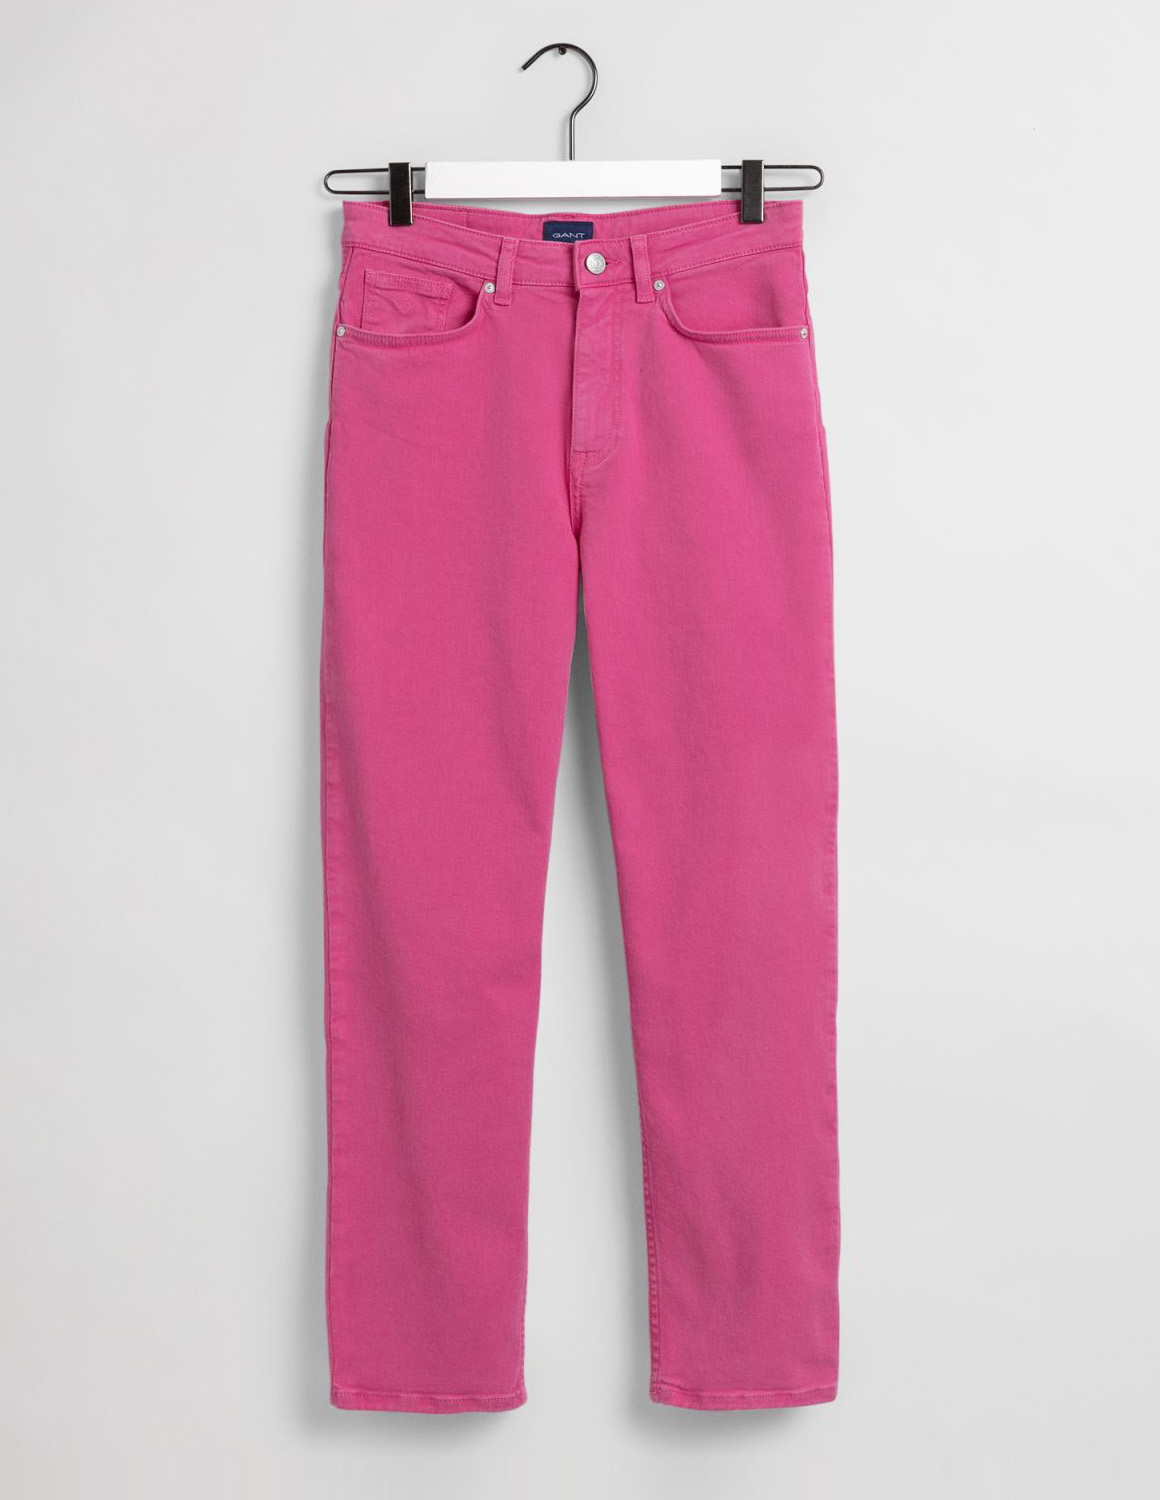 GANT WOMAN " HIGH-WAISTED " CROPPED COLOUR JEANS ME LOGO PATCH ΣΤΟ ΠΙΣΩ ΜΕΡΟΣ, SLIM FIT